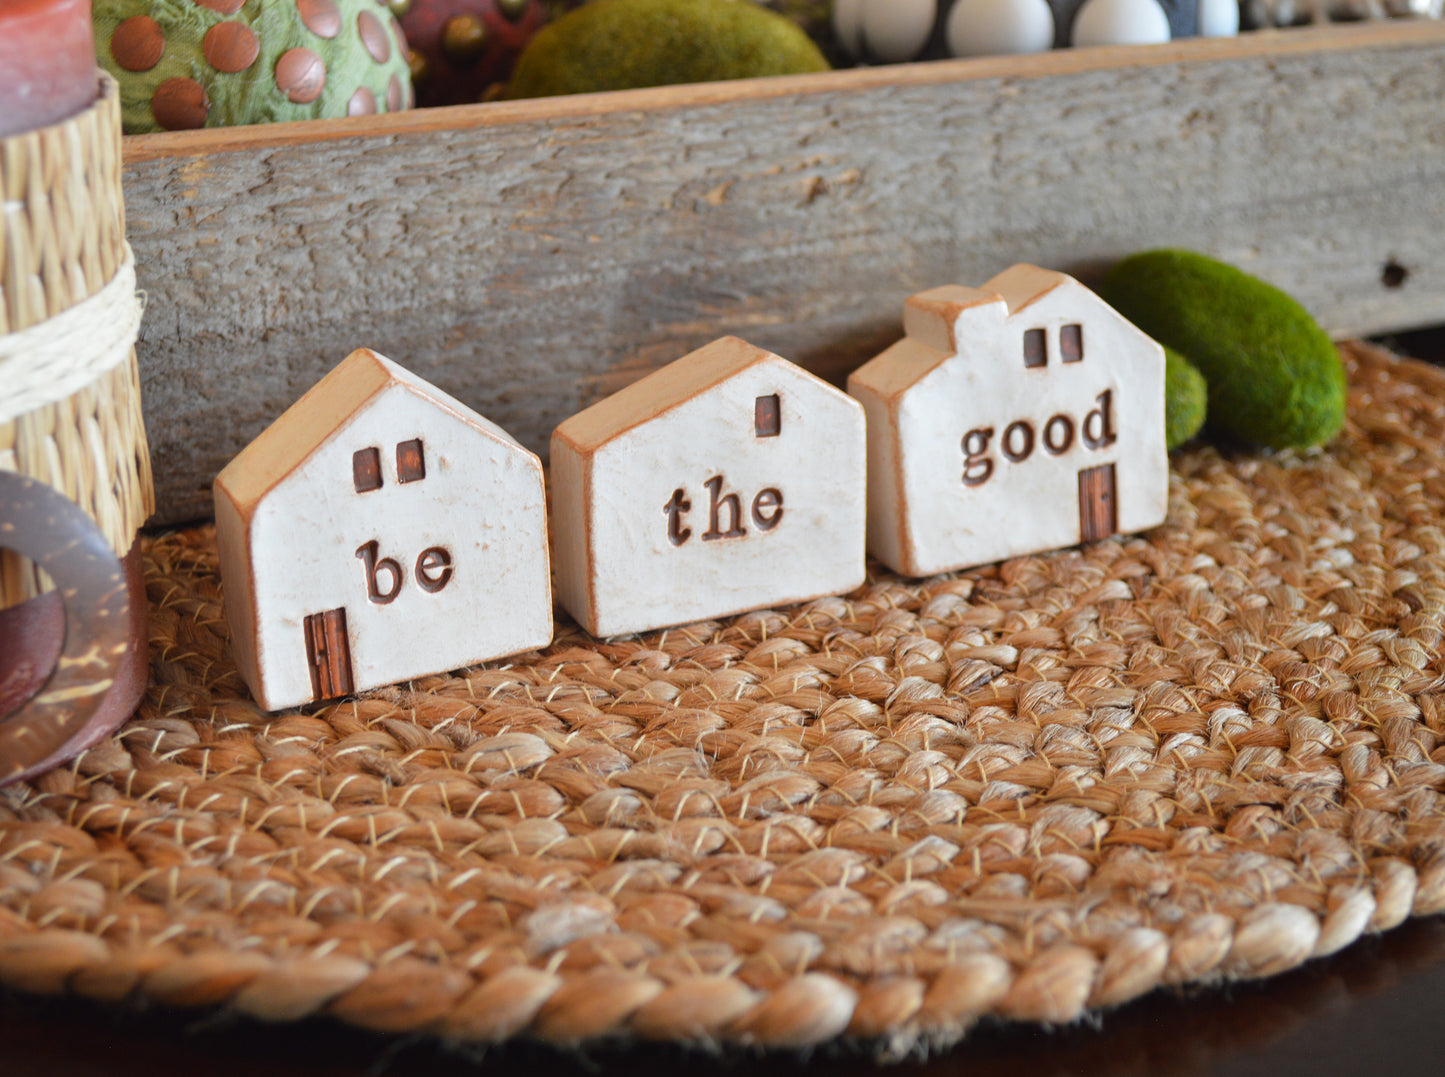 Be the Good houses